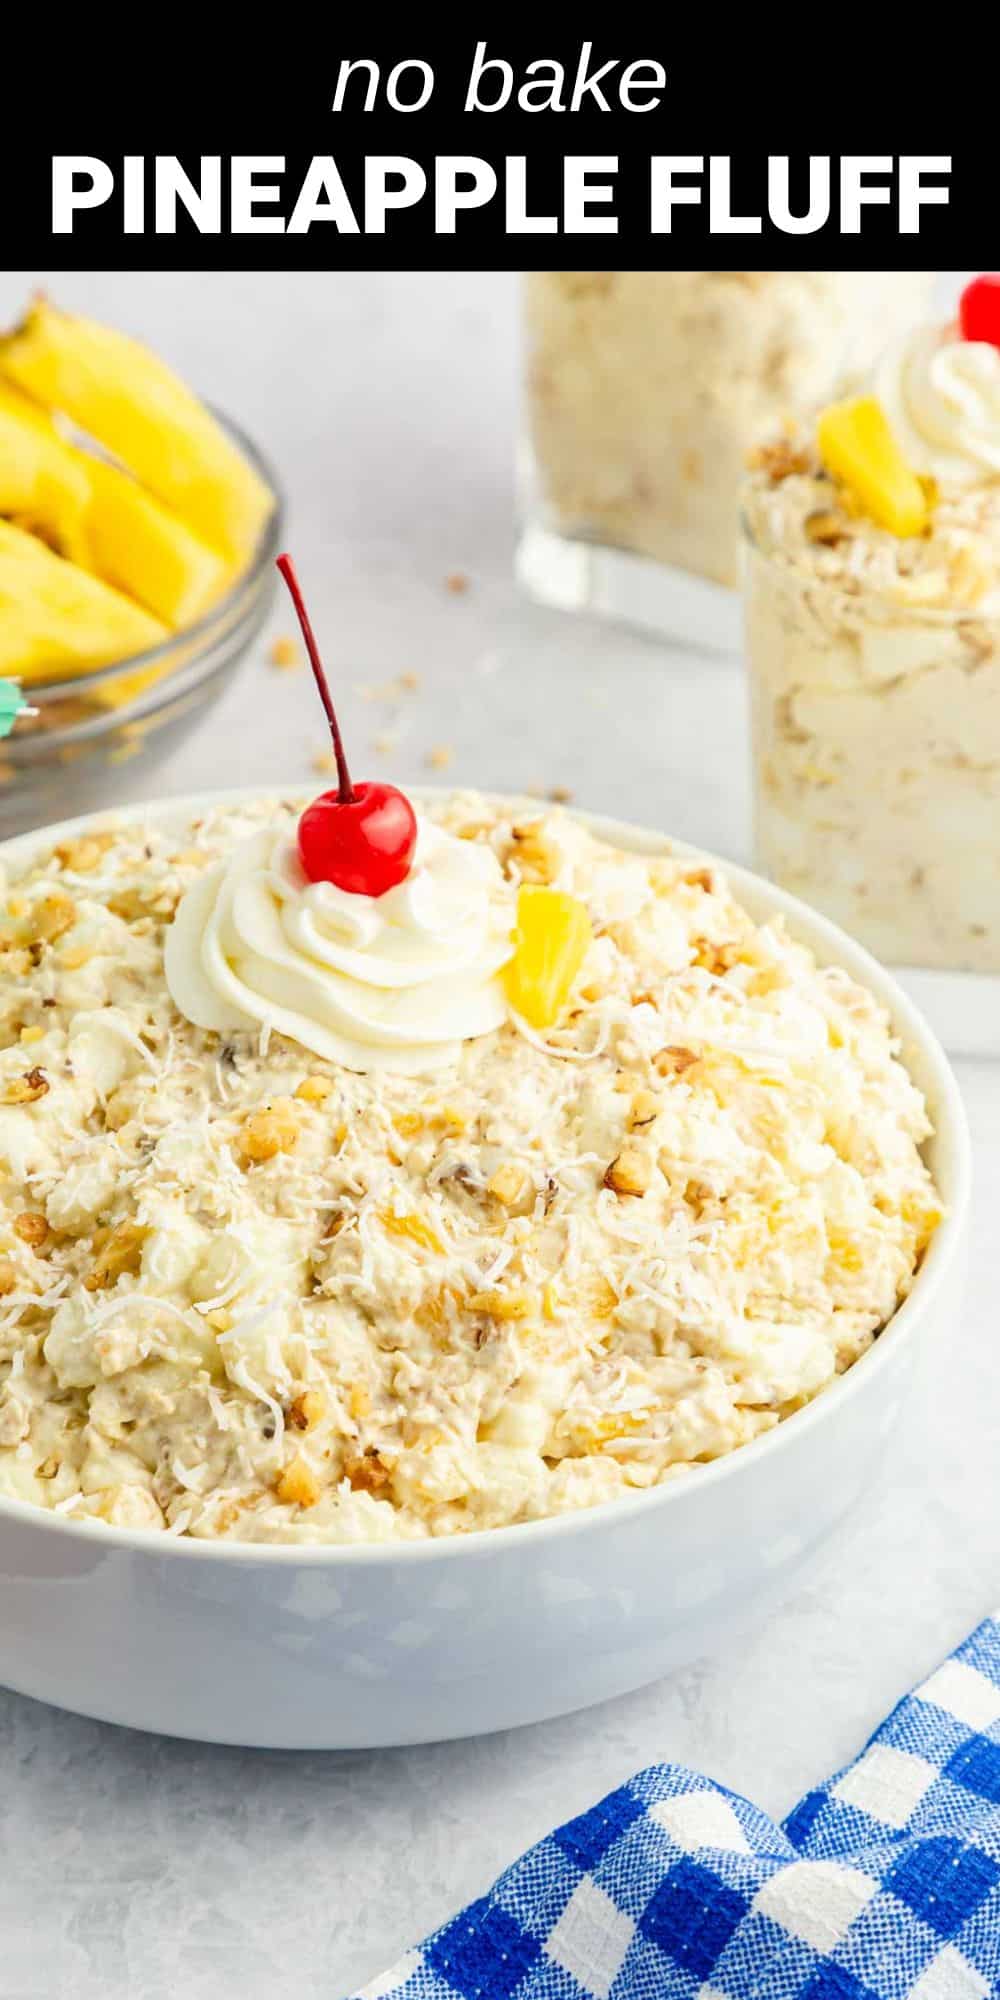 This creamy Pineapple Fluff Salad recipe is a light and refreshing dessert salad filled with all the same yummy, tropical flavors of a pina colada. It makes the perfect quick and easy sweet treat on a hot summer day.